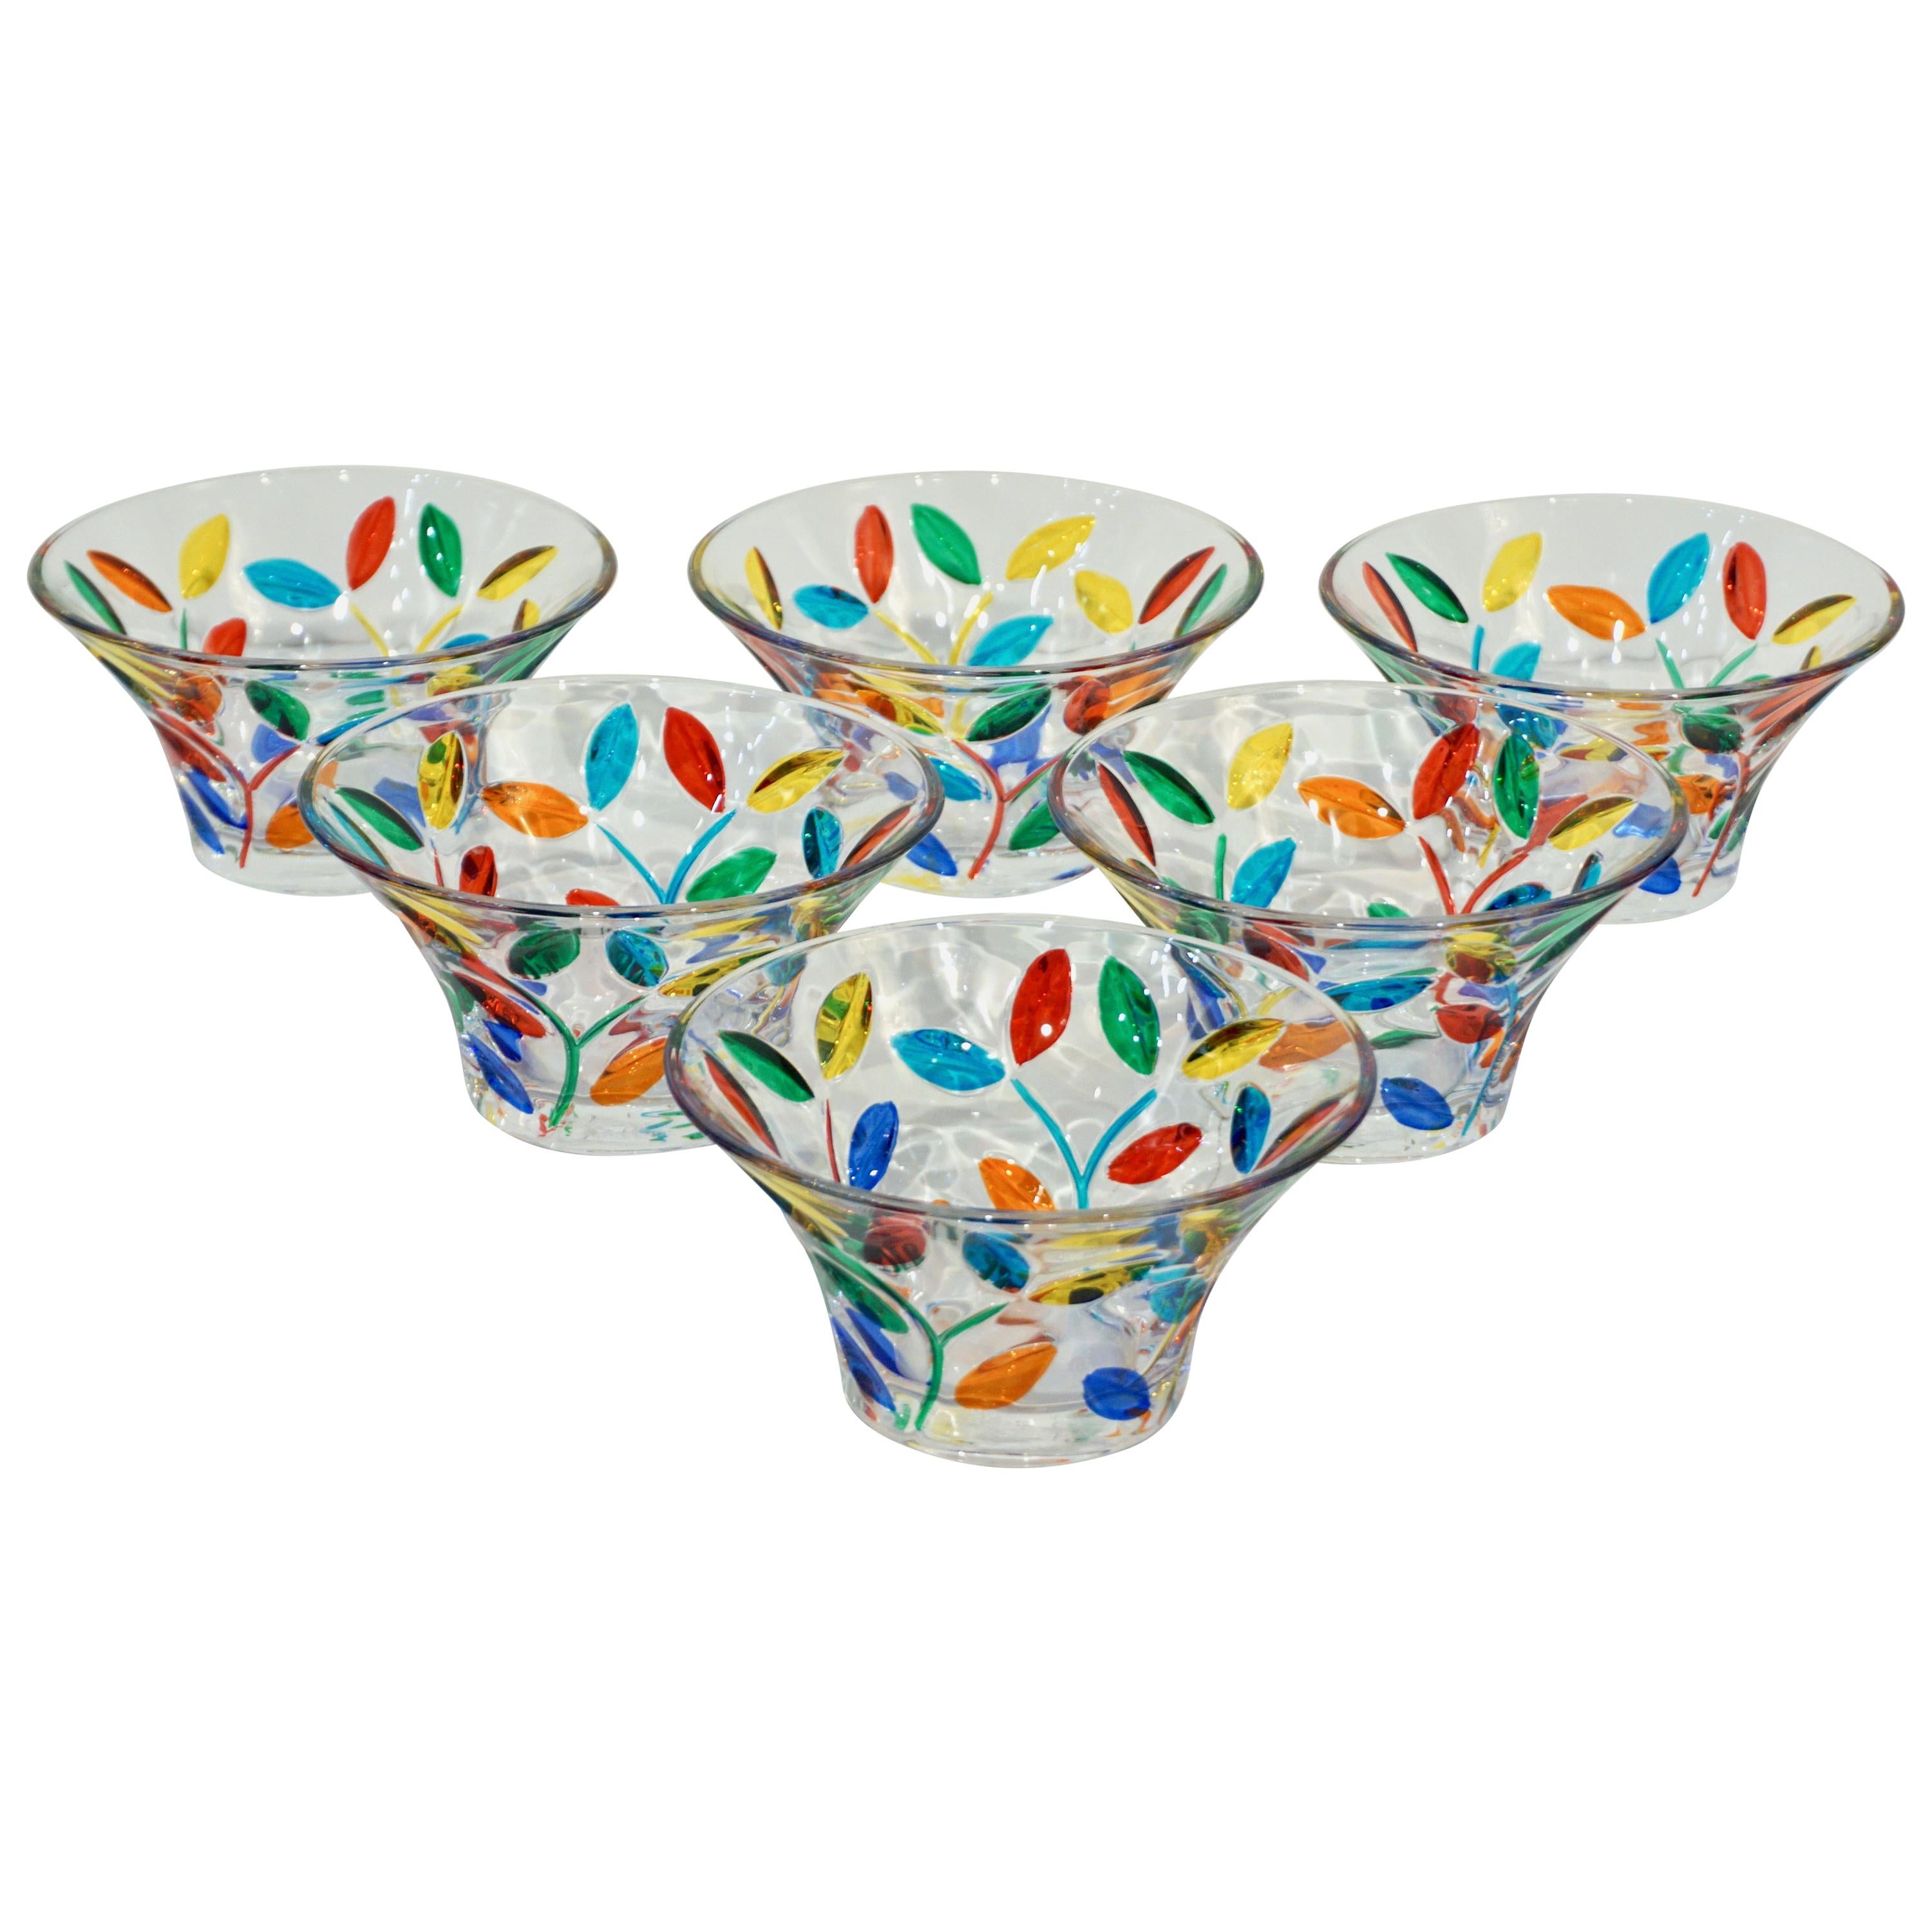 Colleoni Modern Set of 6 Crystal Murano Glass Cups / Bowls with Colorful Leaves